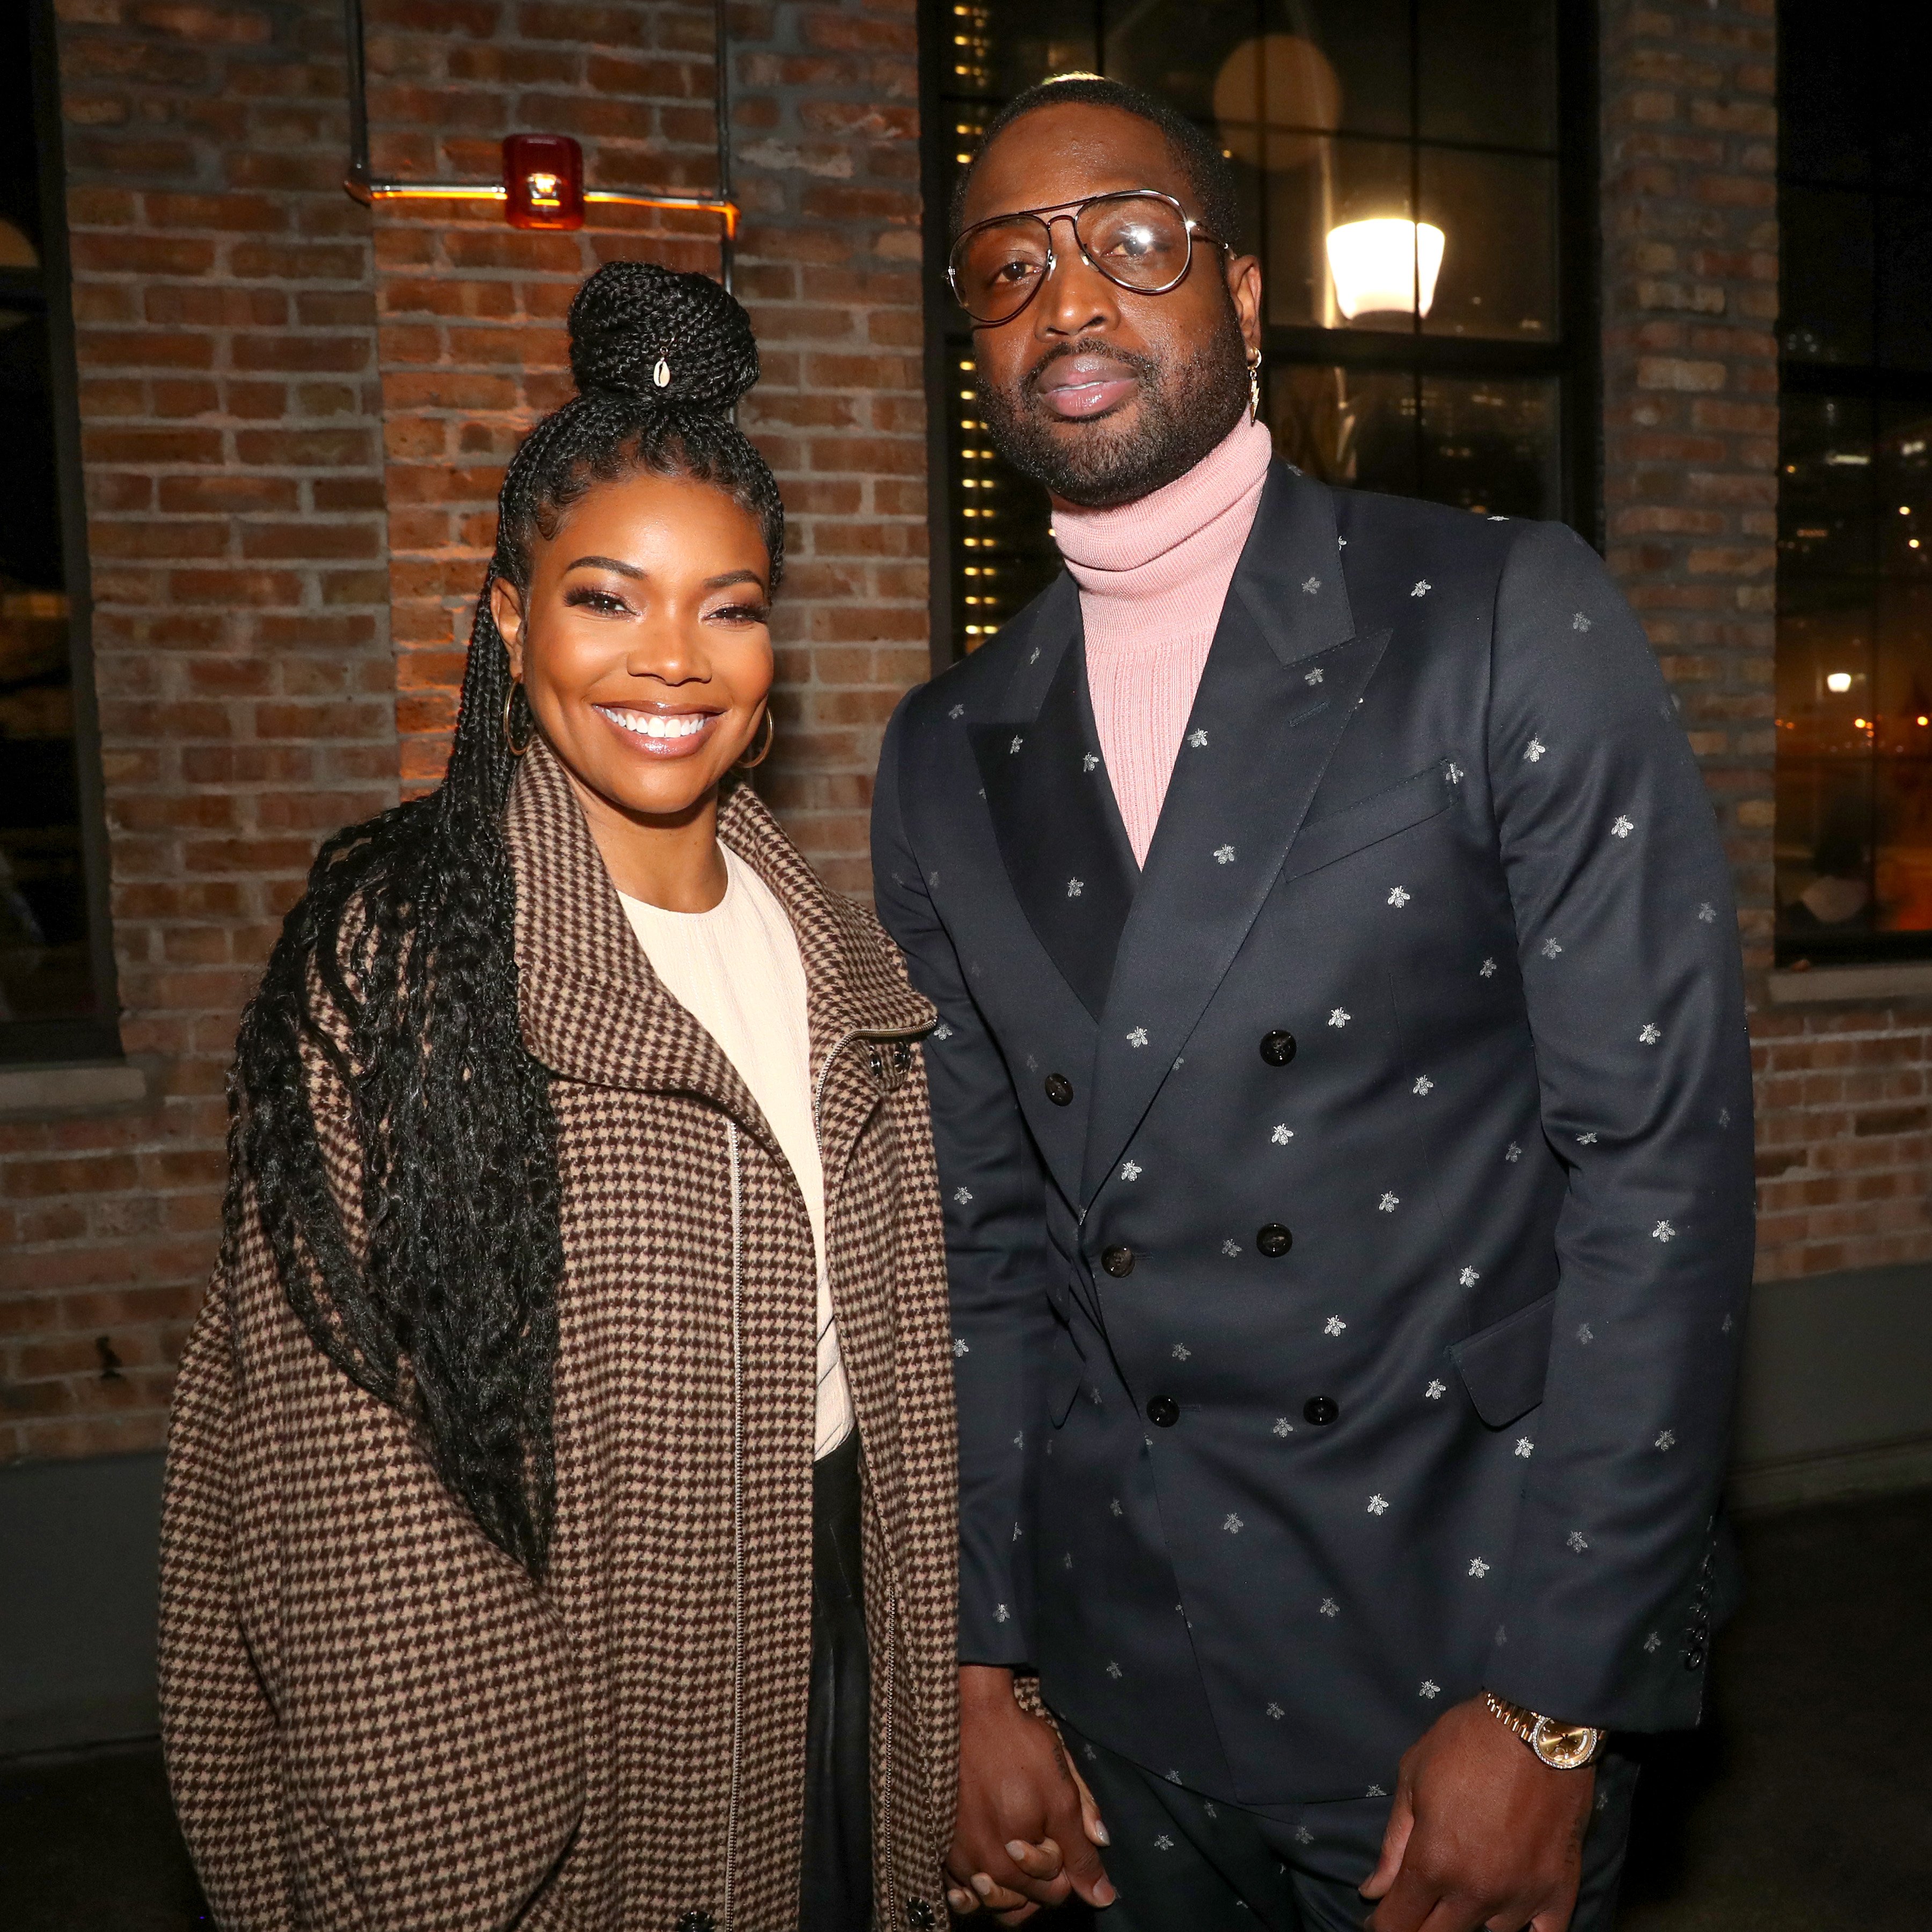 Gabrielle Union and Dwyane Wade attend Stance Spades at NBA All-Star 2020 on February 15, 2020. | Photo: Getty Images